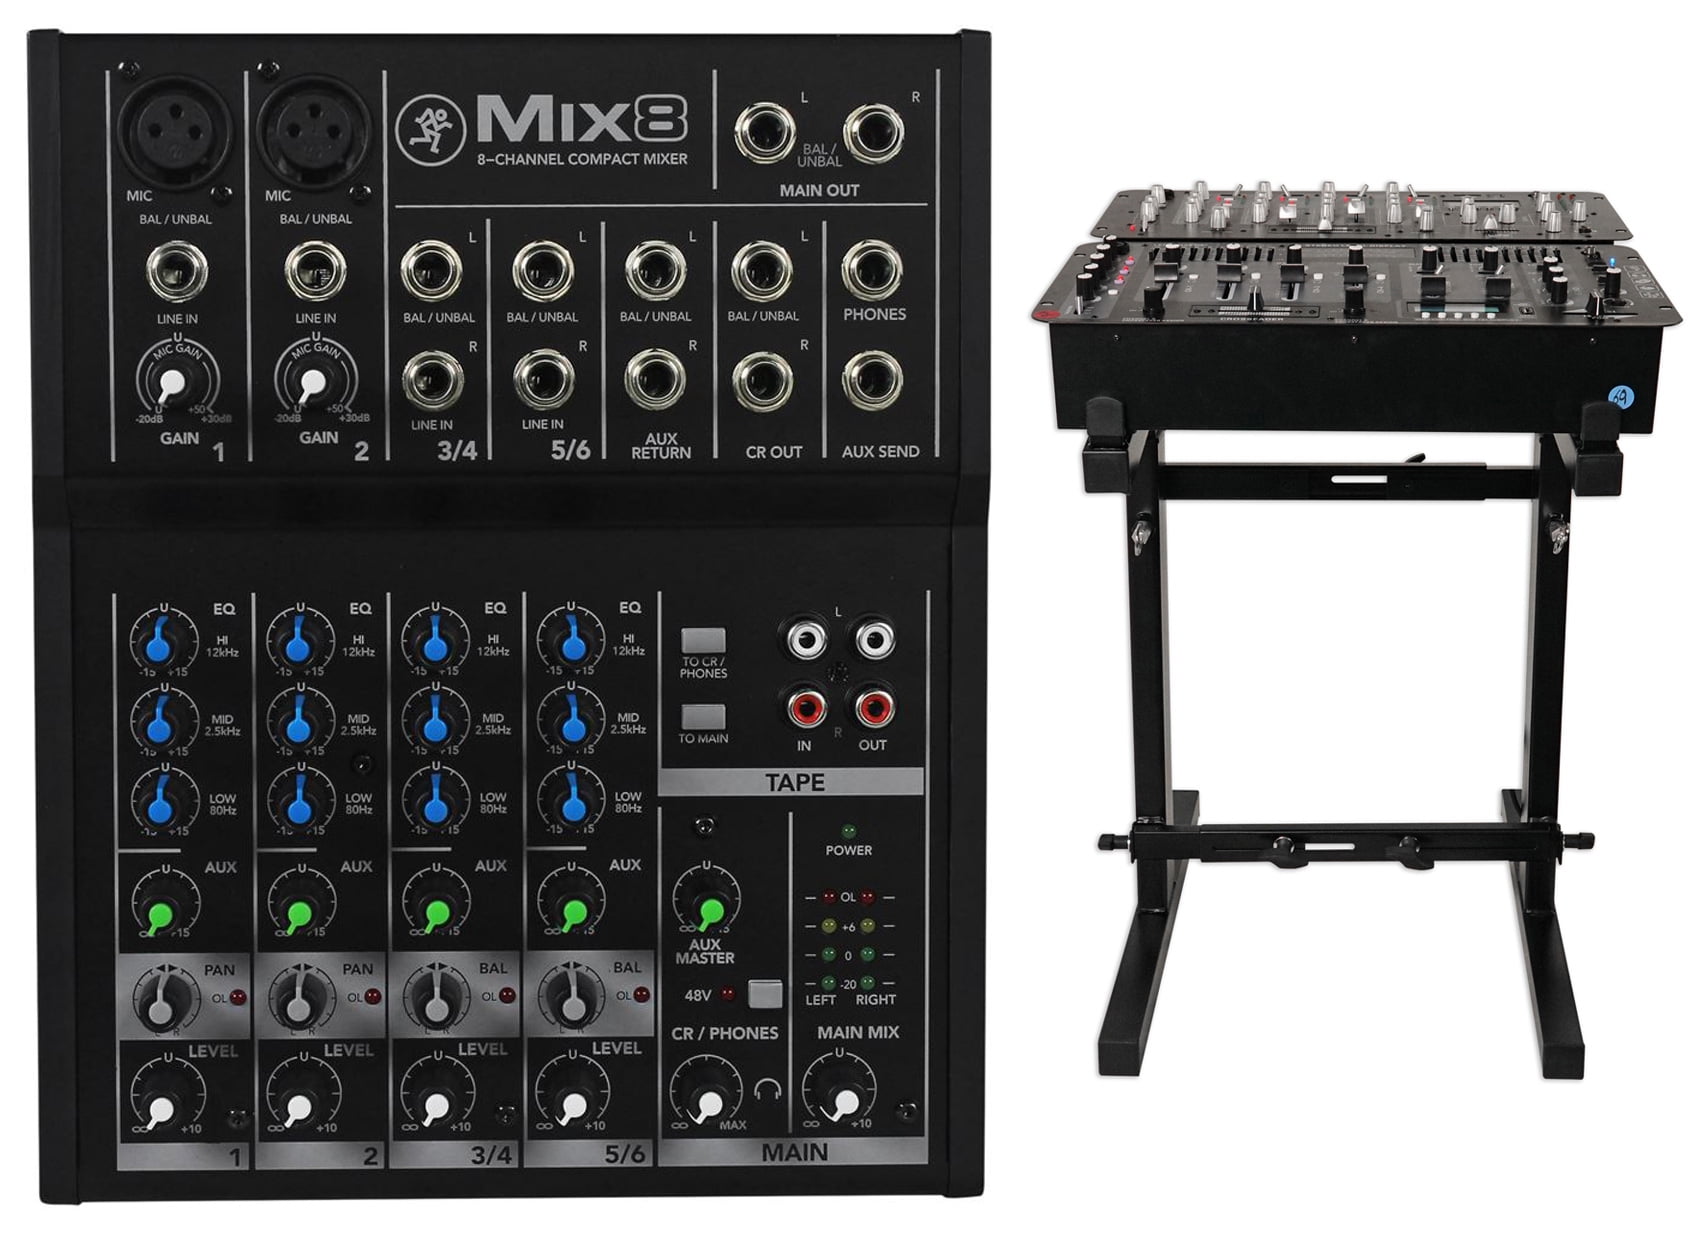 New Mackie Mix8 Compact Mixer Constructed With a Durable Metal Chasis+Stand - Walmart.com